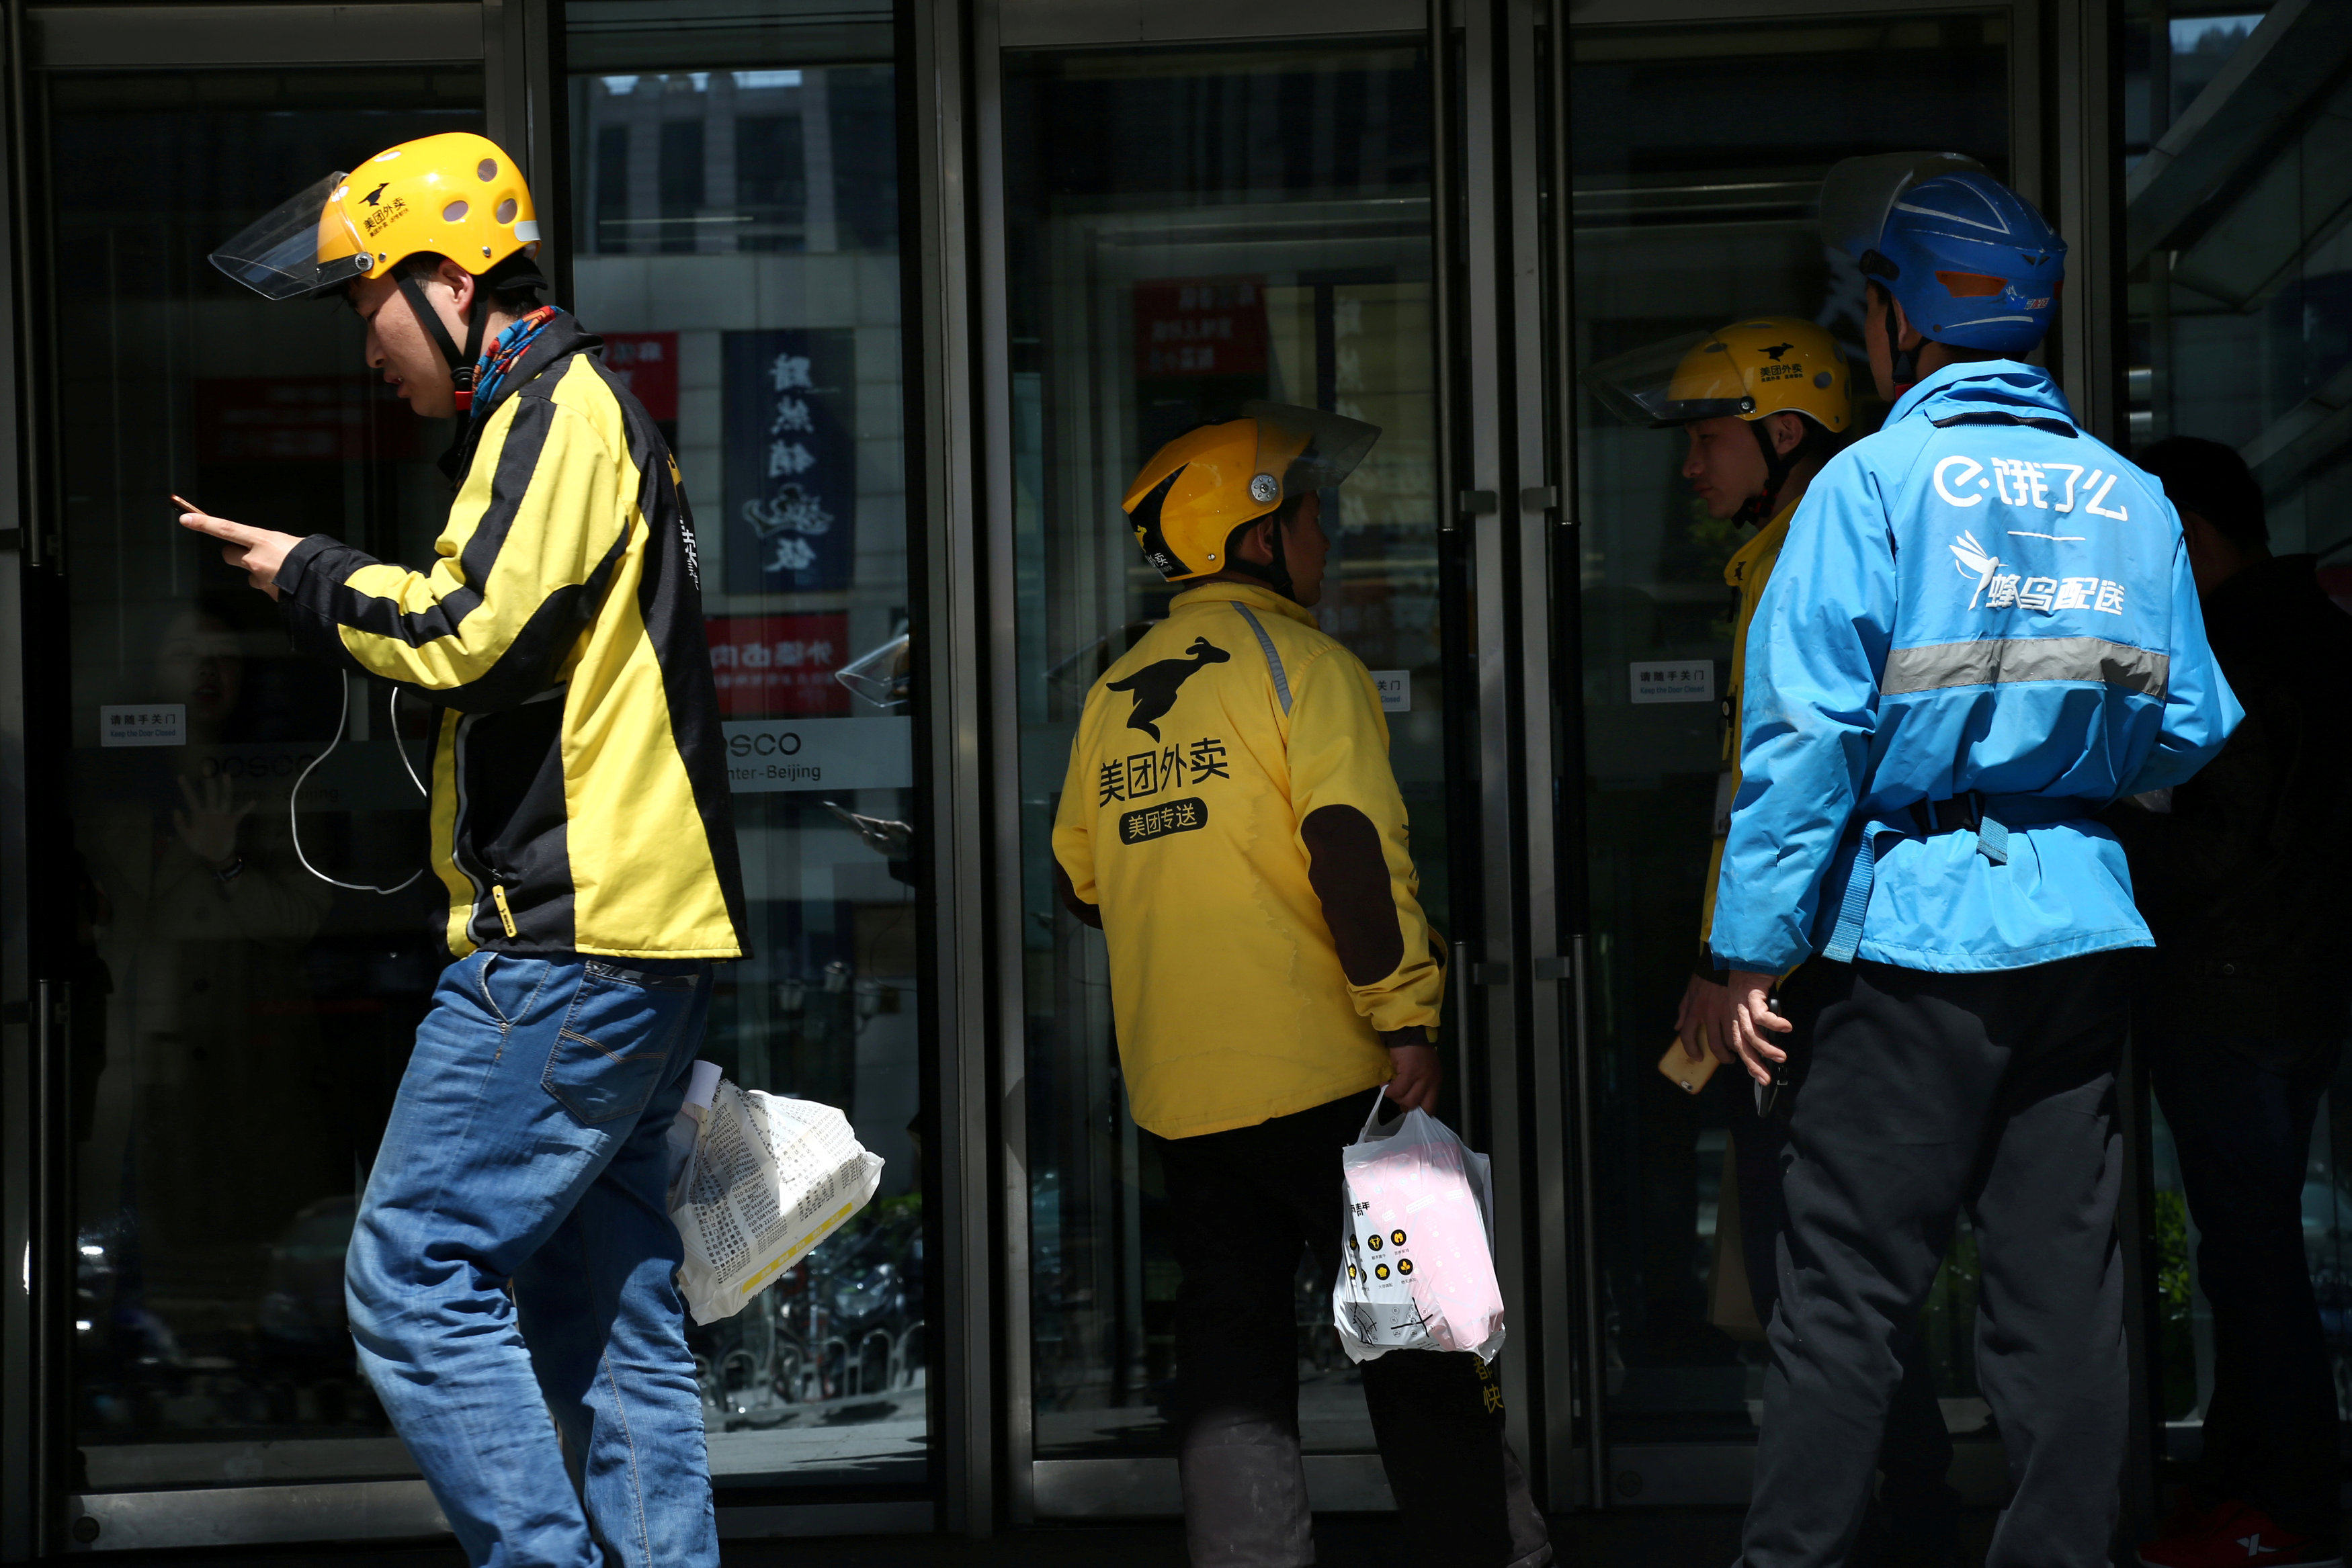 Delivery riders for Ele.me, in blue, and Meituan, yellow, seen in Beijing on April 11, 2018. ByteDance’s Douyin entered the highly competitive market last year, and it has contracted with Ele.me, among others, to deliver meals ordered on its platform. Photo: Reuters